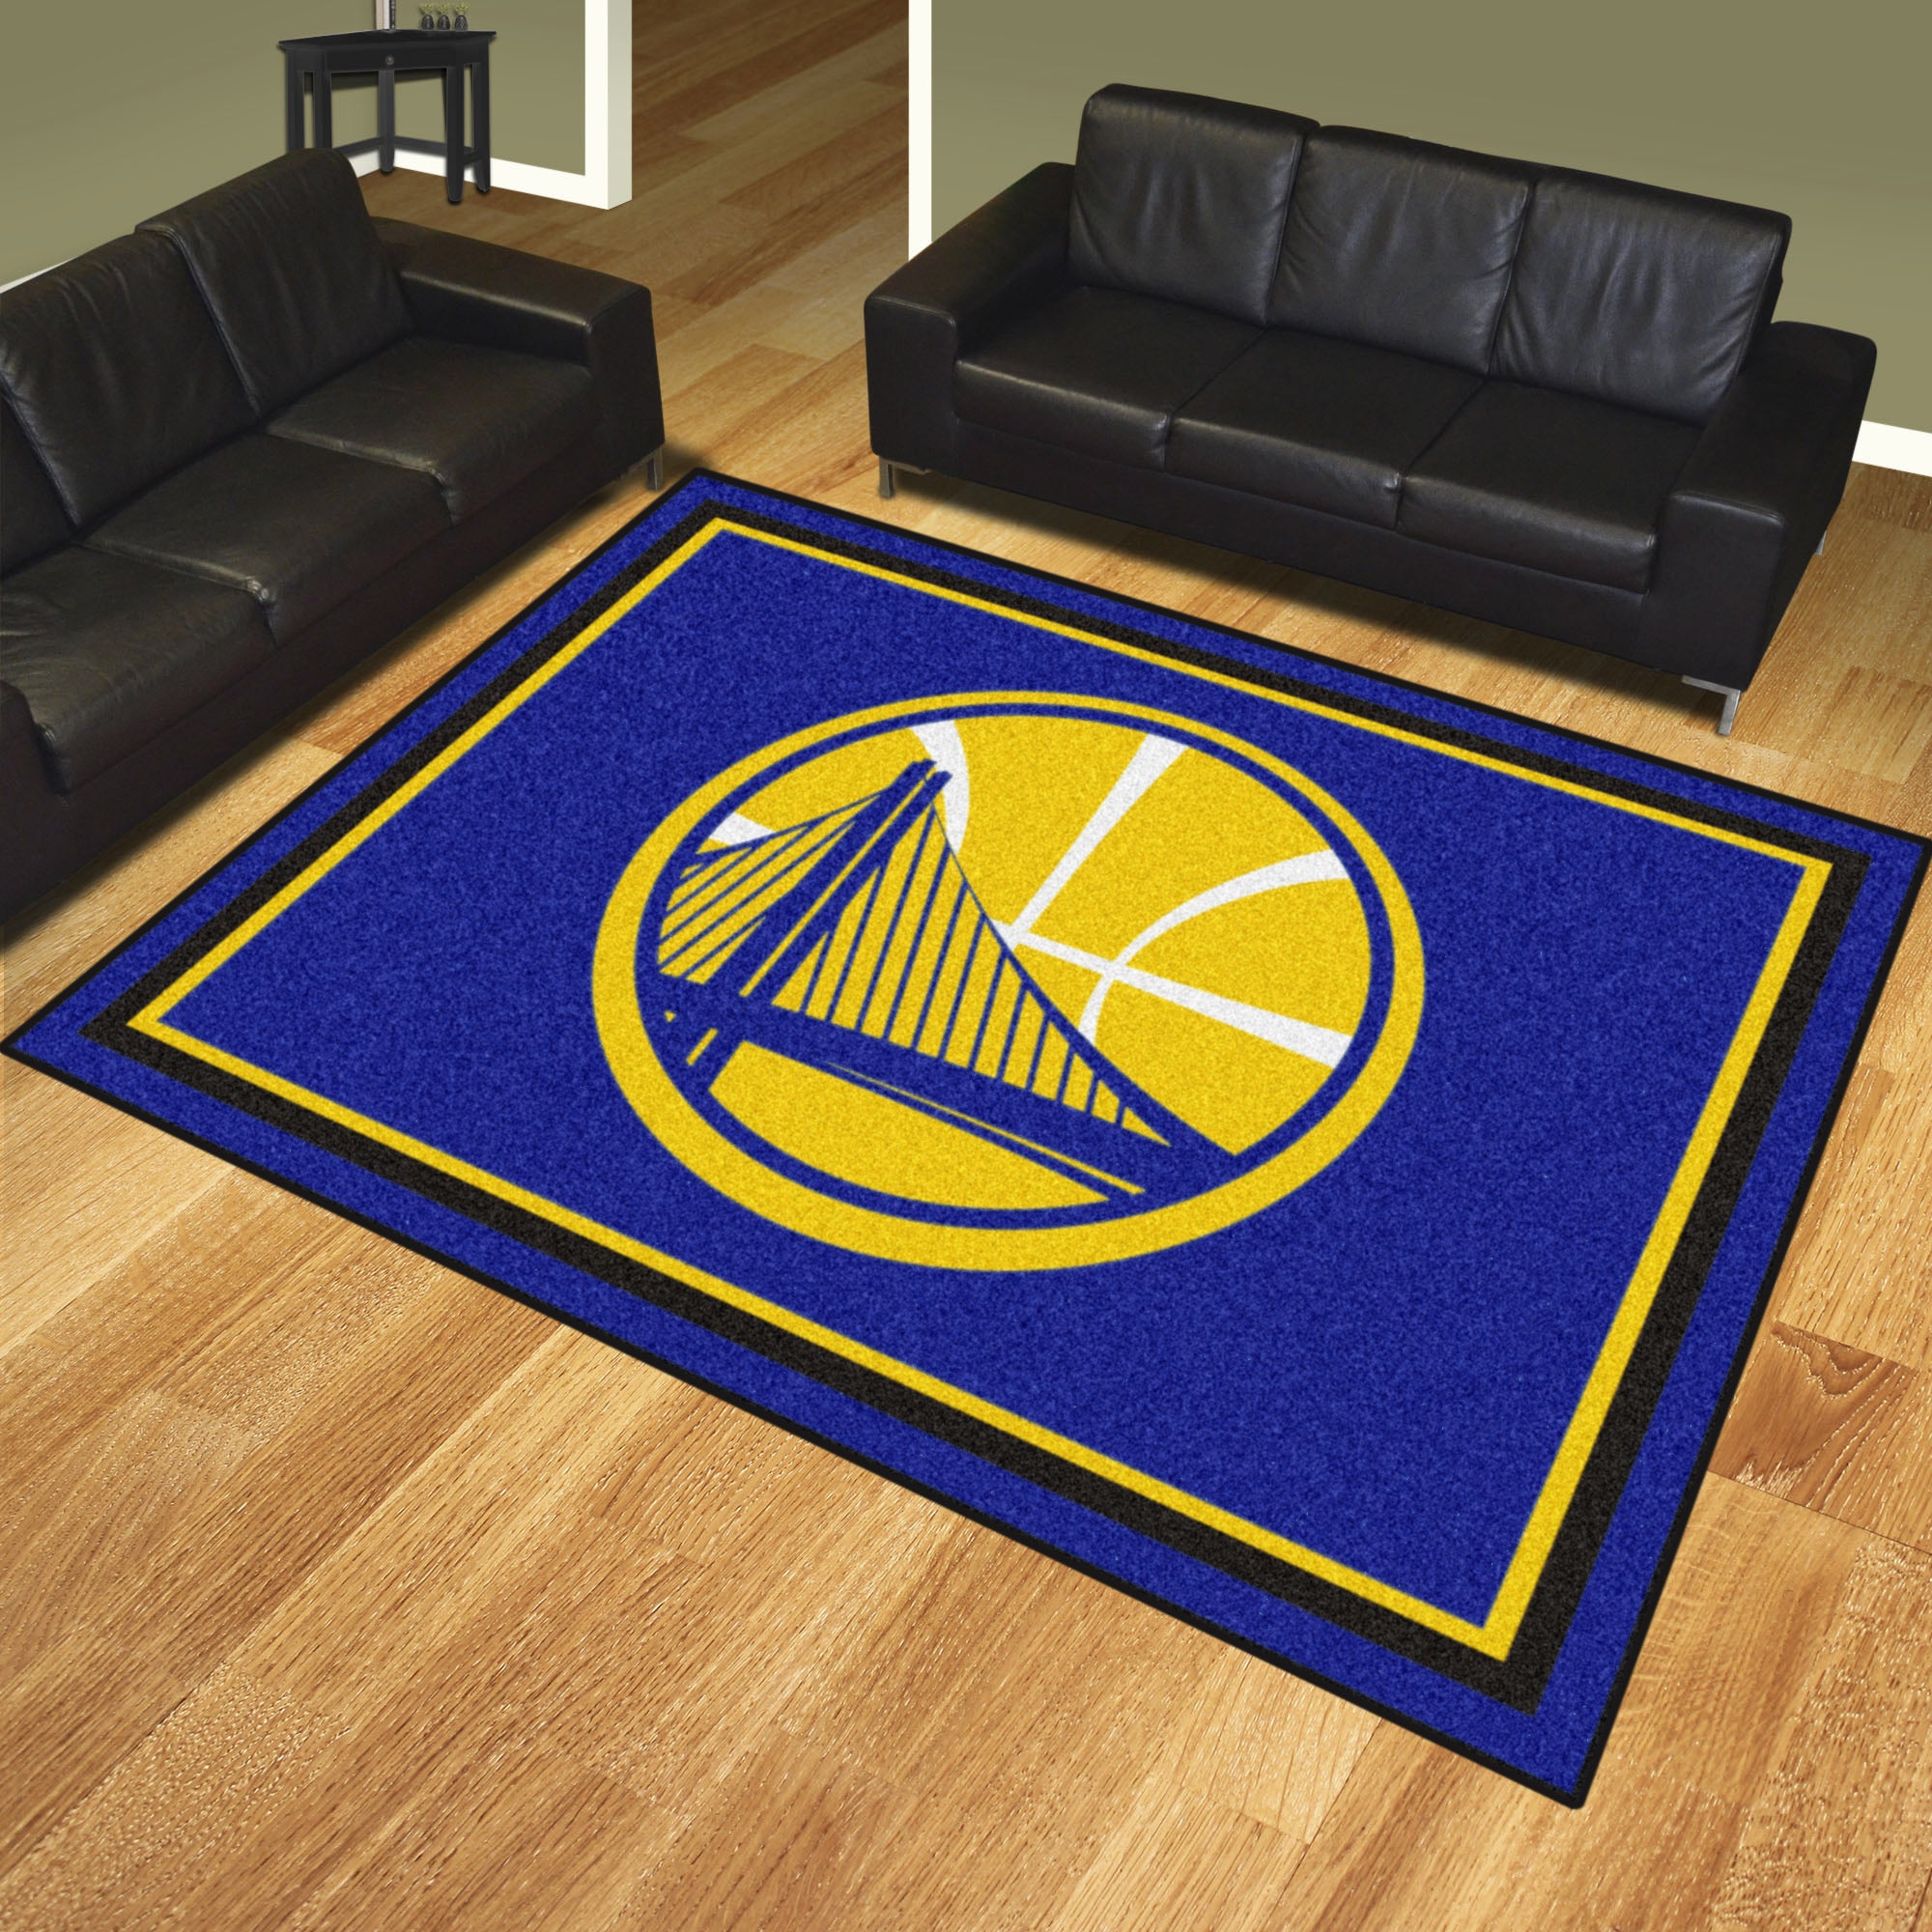 Golden state 8'x10' Rug